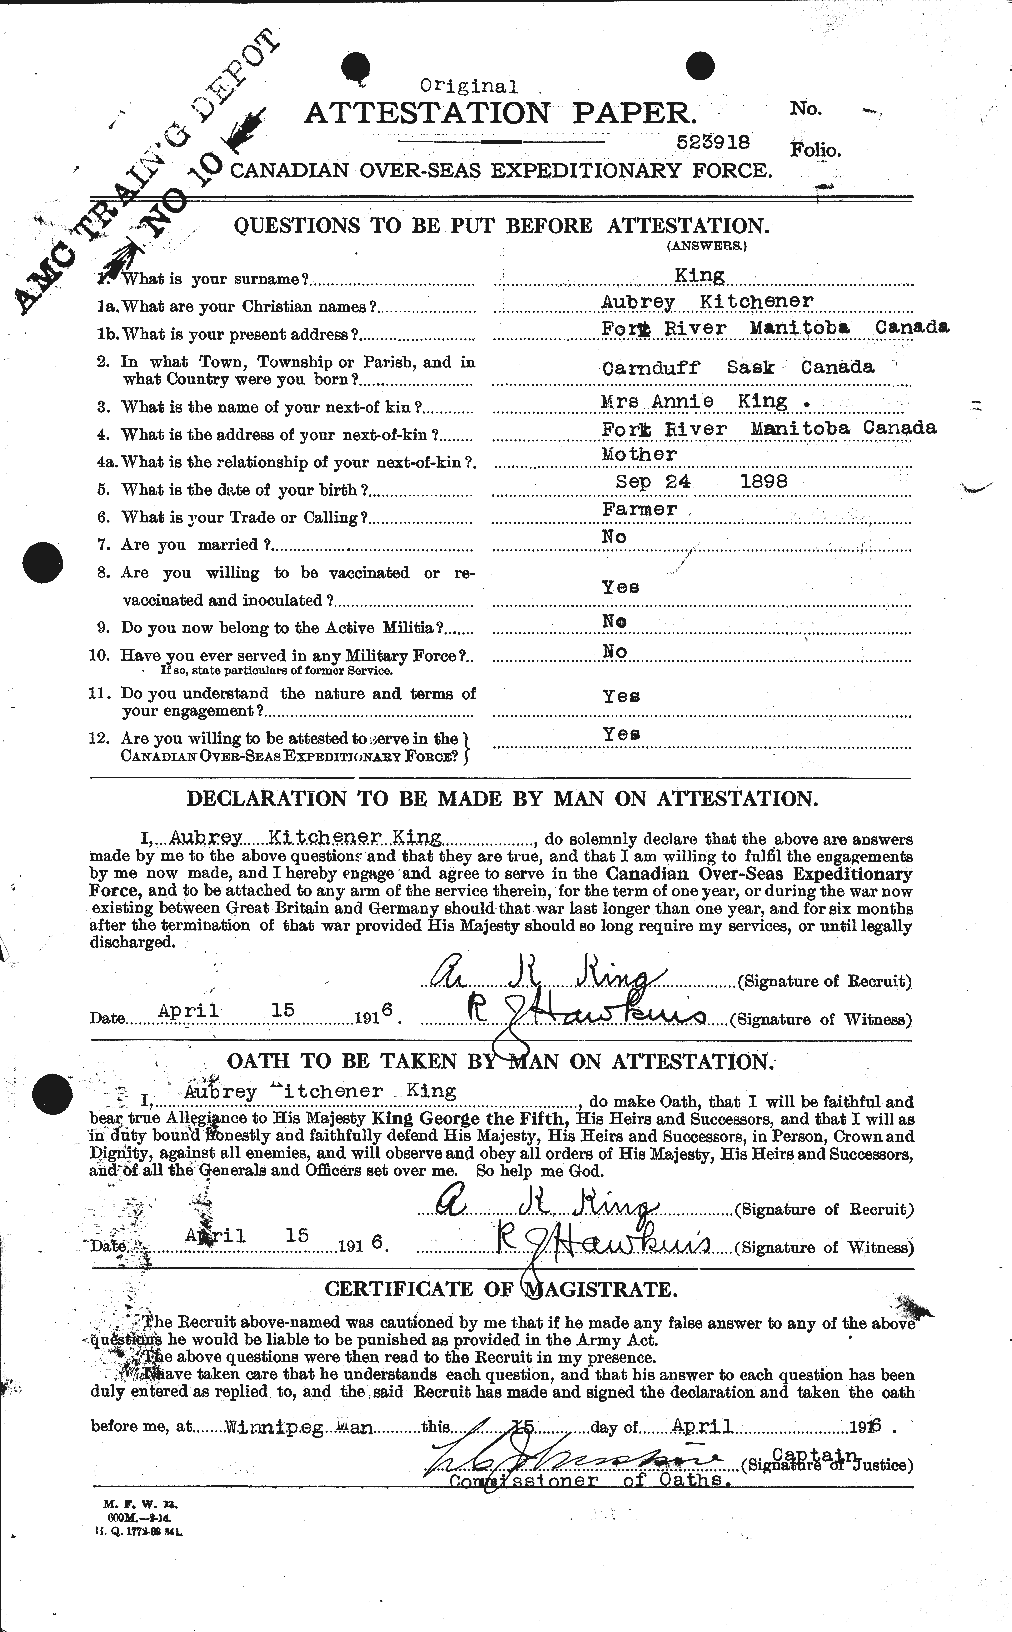 Personnel Records of the First World War - CEF 437720a